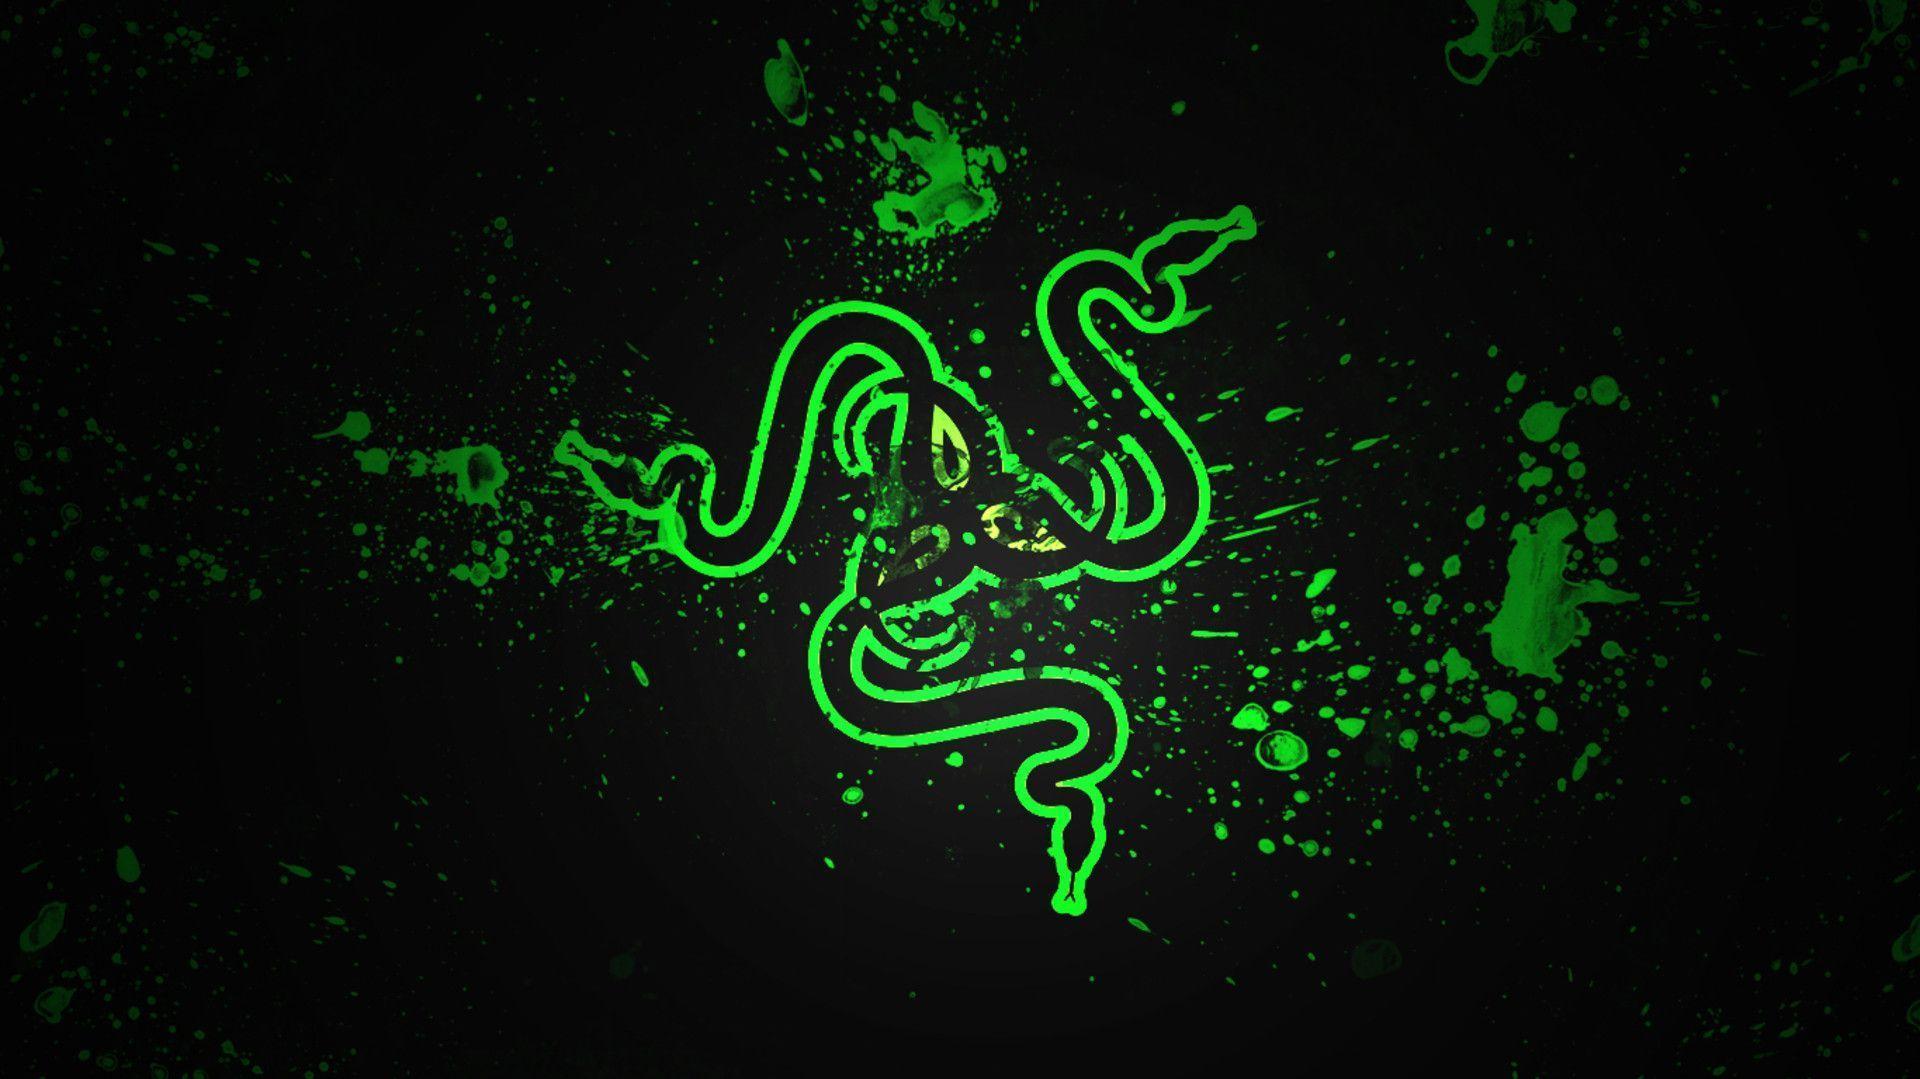 Gaming Wallpapers 1920x1080 Razer We Present You Our Collection Of Desktop Wallpaper Theme